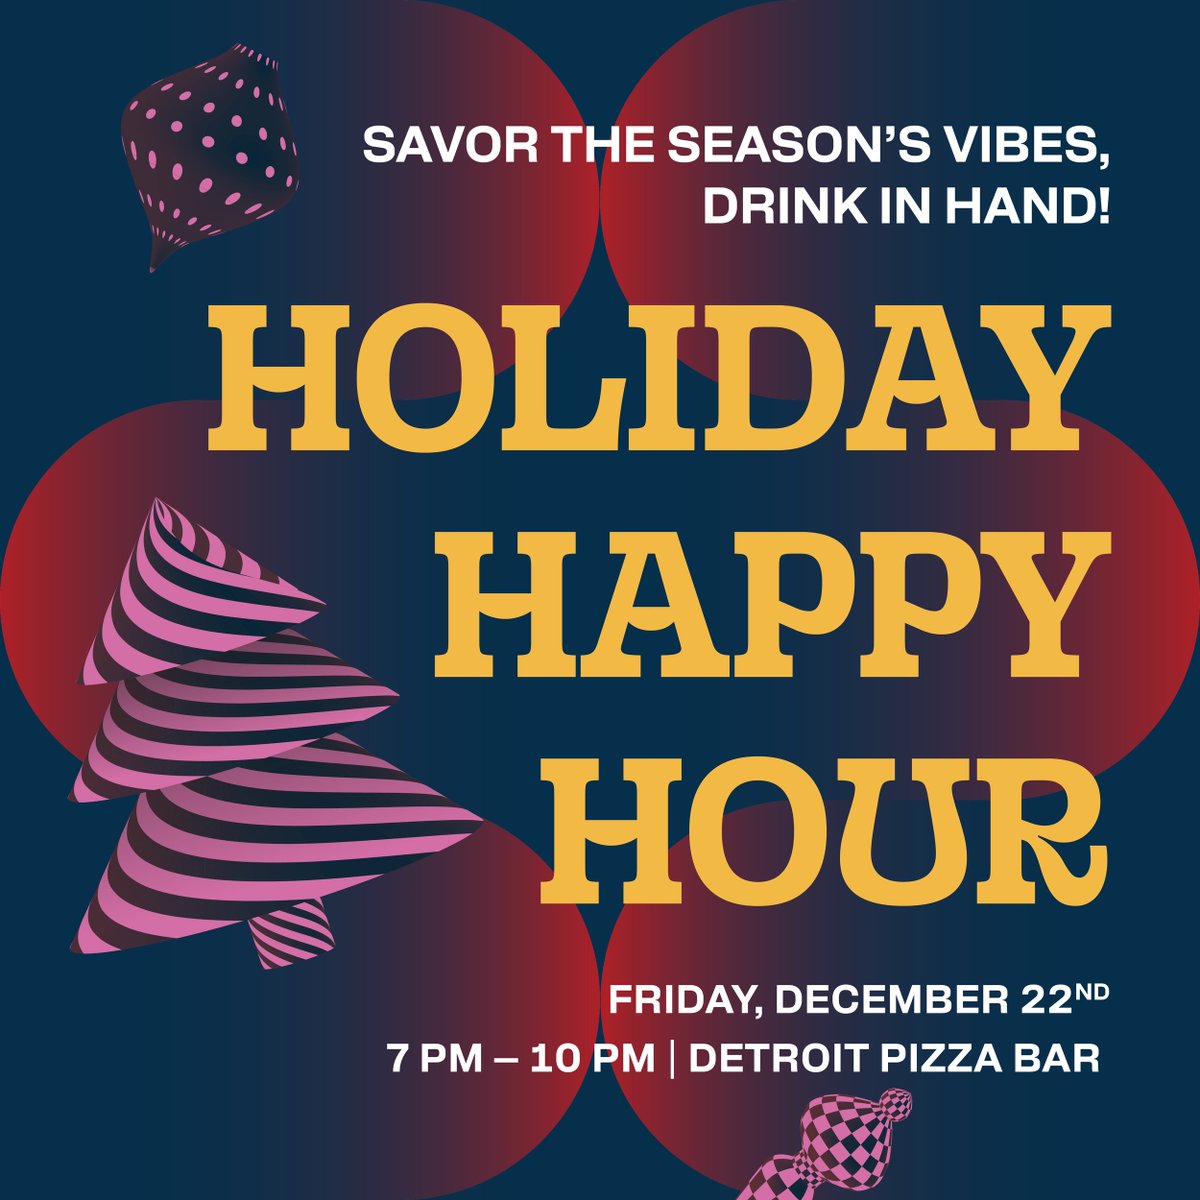 Come join us as we celebrate the end of an absolutely amazing year with a mouthwatering slice of pizza and a refreshing brew from Detroit Pizza Bar. It's time to unwind and indulge in the ultimate Holiday Happy Hour experience! 🍕🍻